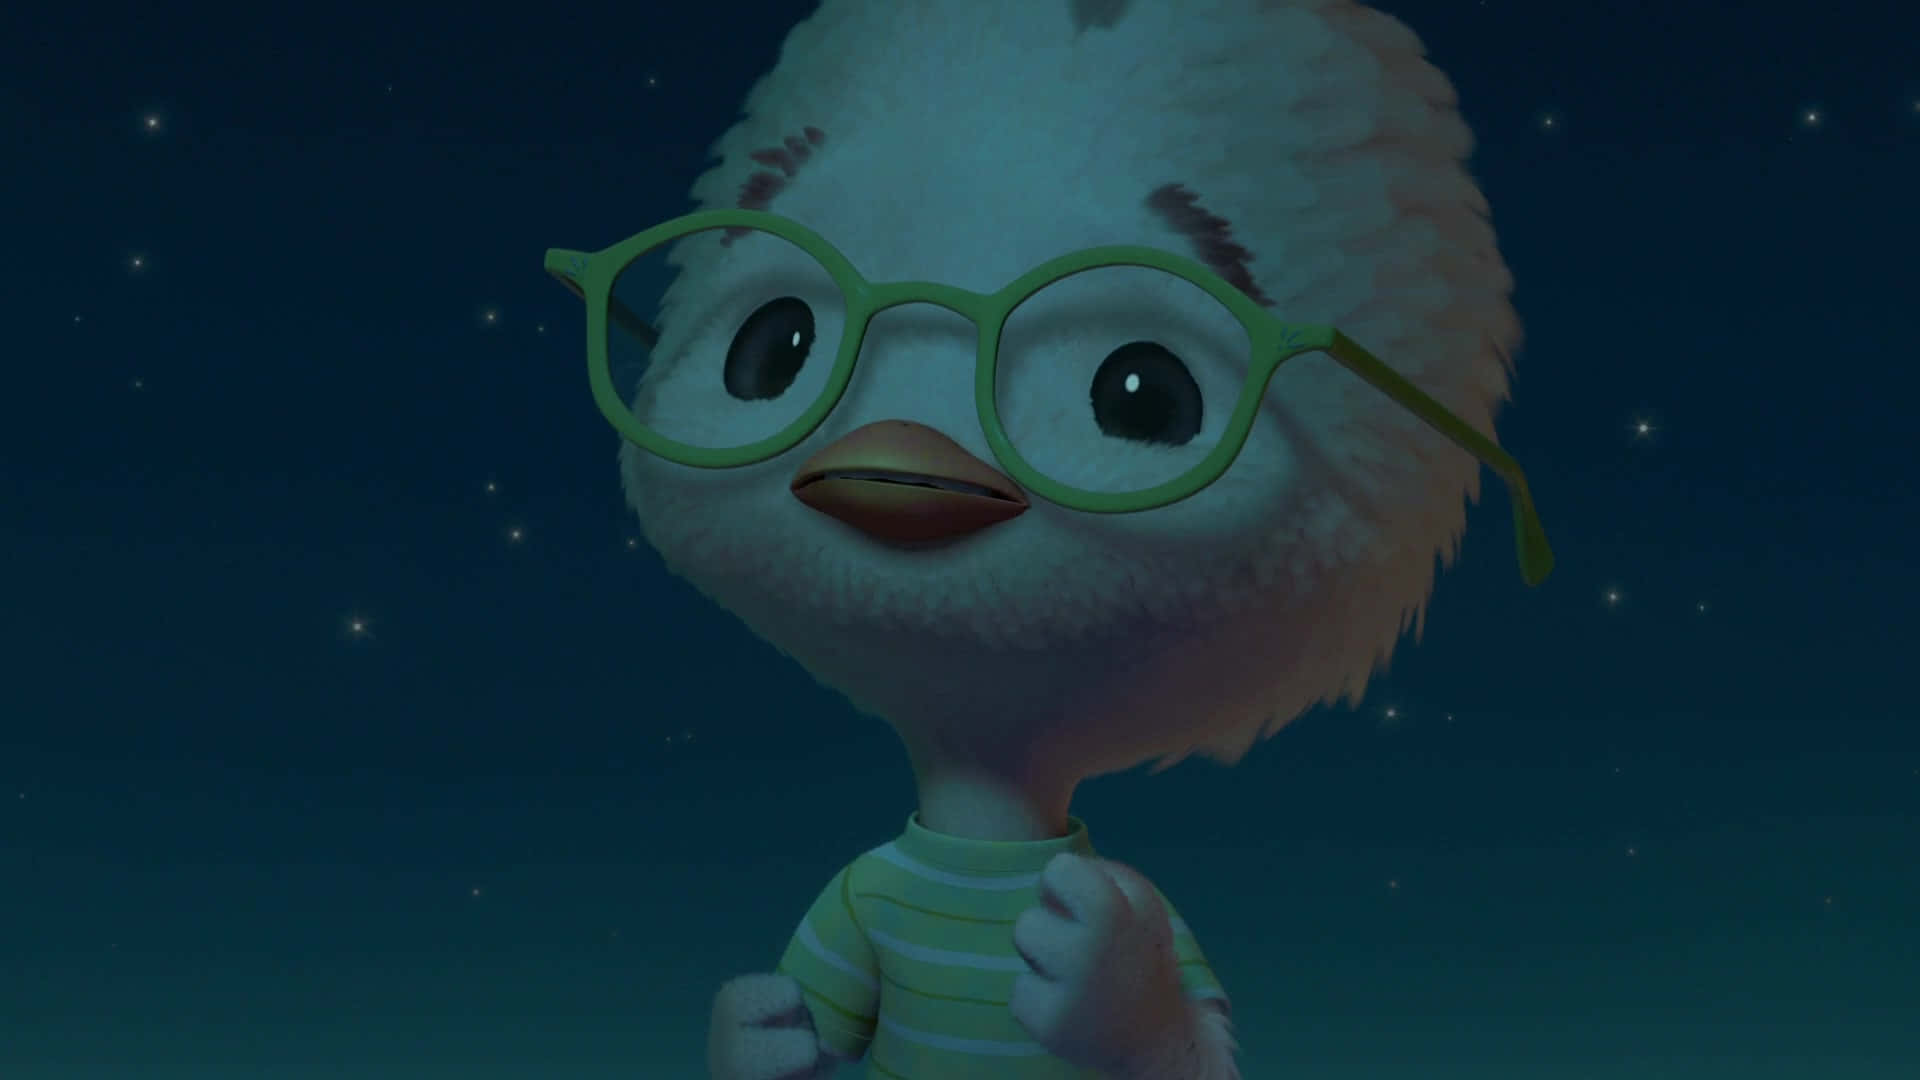 A Cartoon Chicken With Glasses Standing In The Night Sky